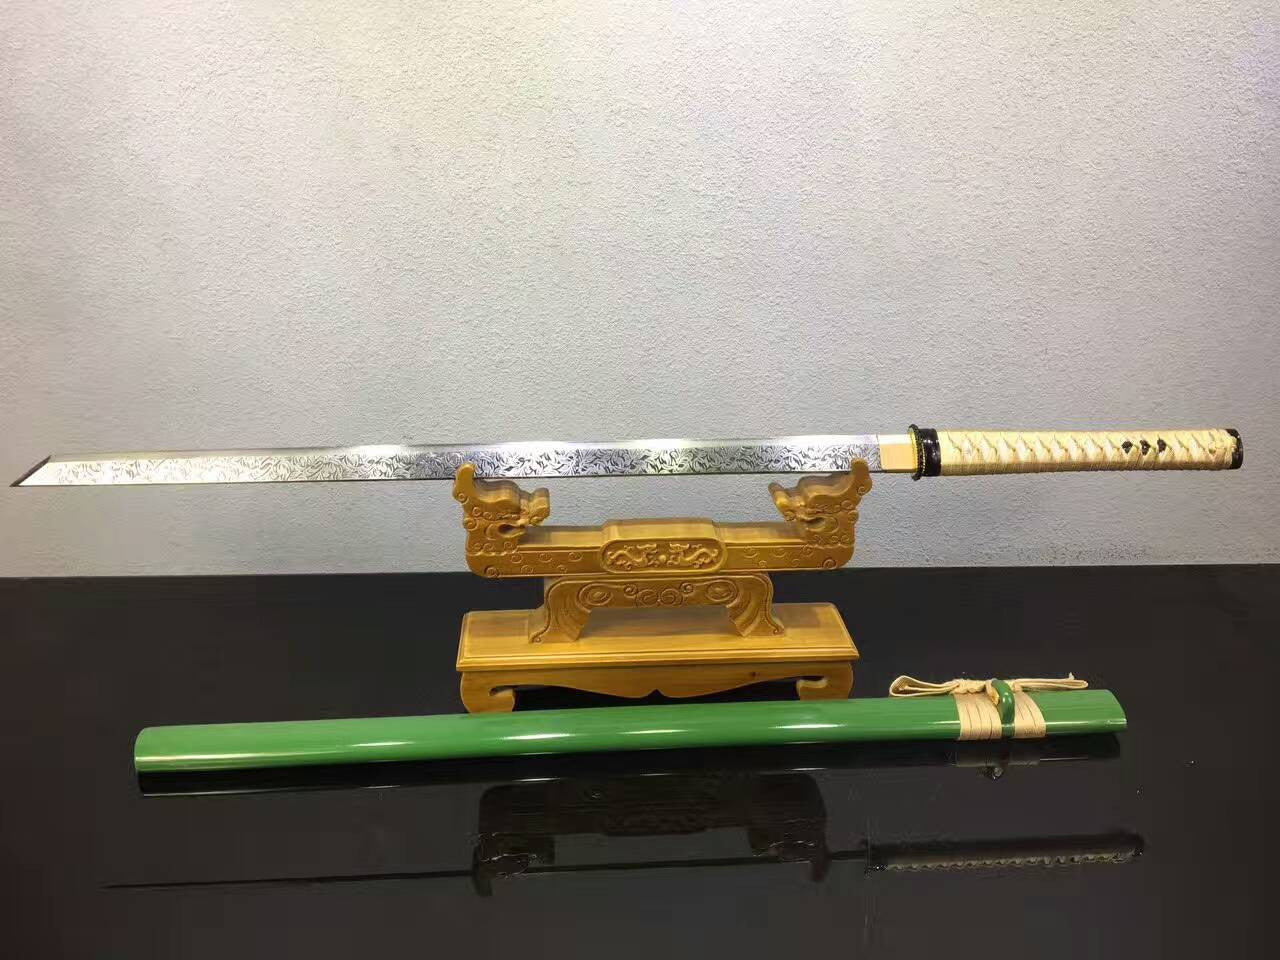 Tang dao(High manganese steel,Green scabbard,Alloy)Full tang,Length 39" - Chinese sword shop